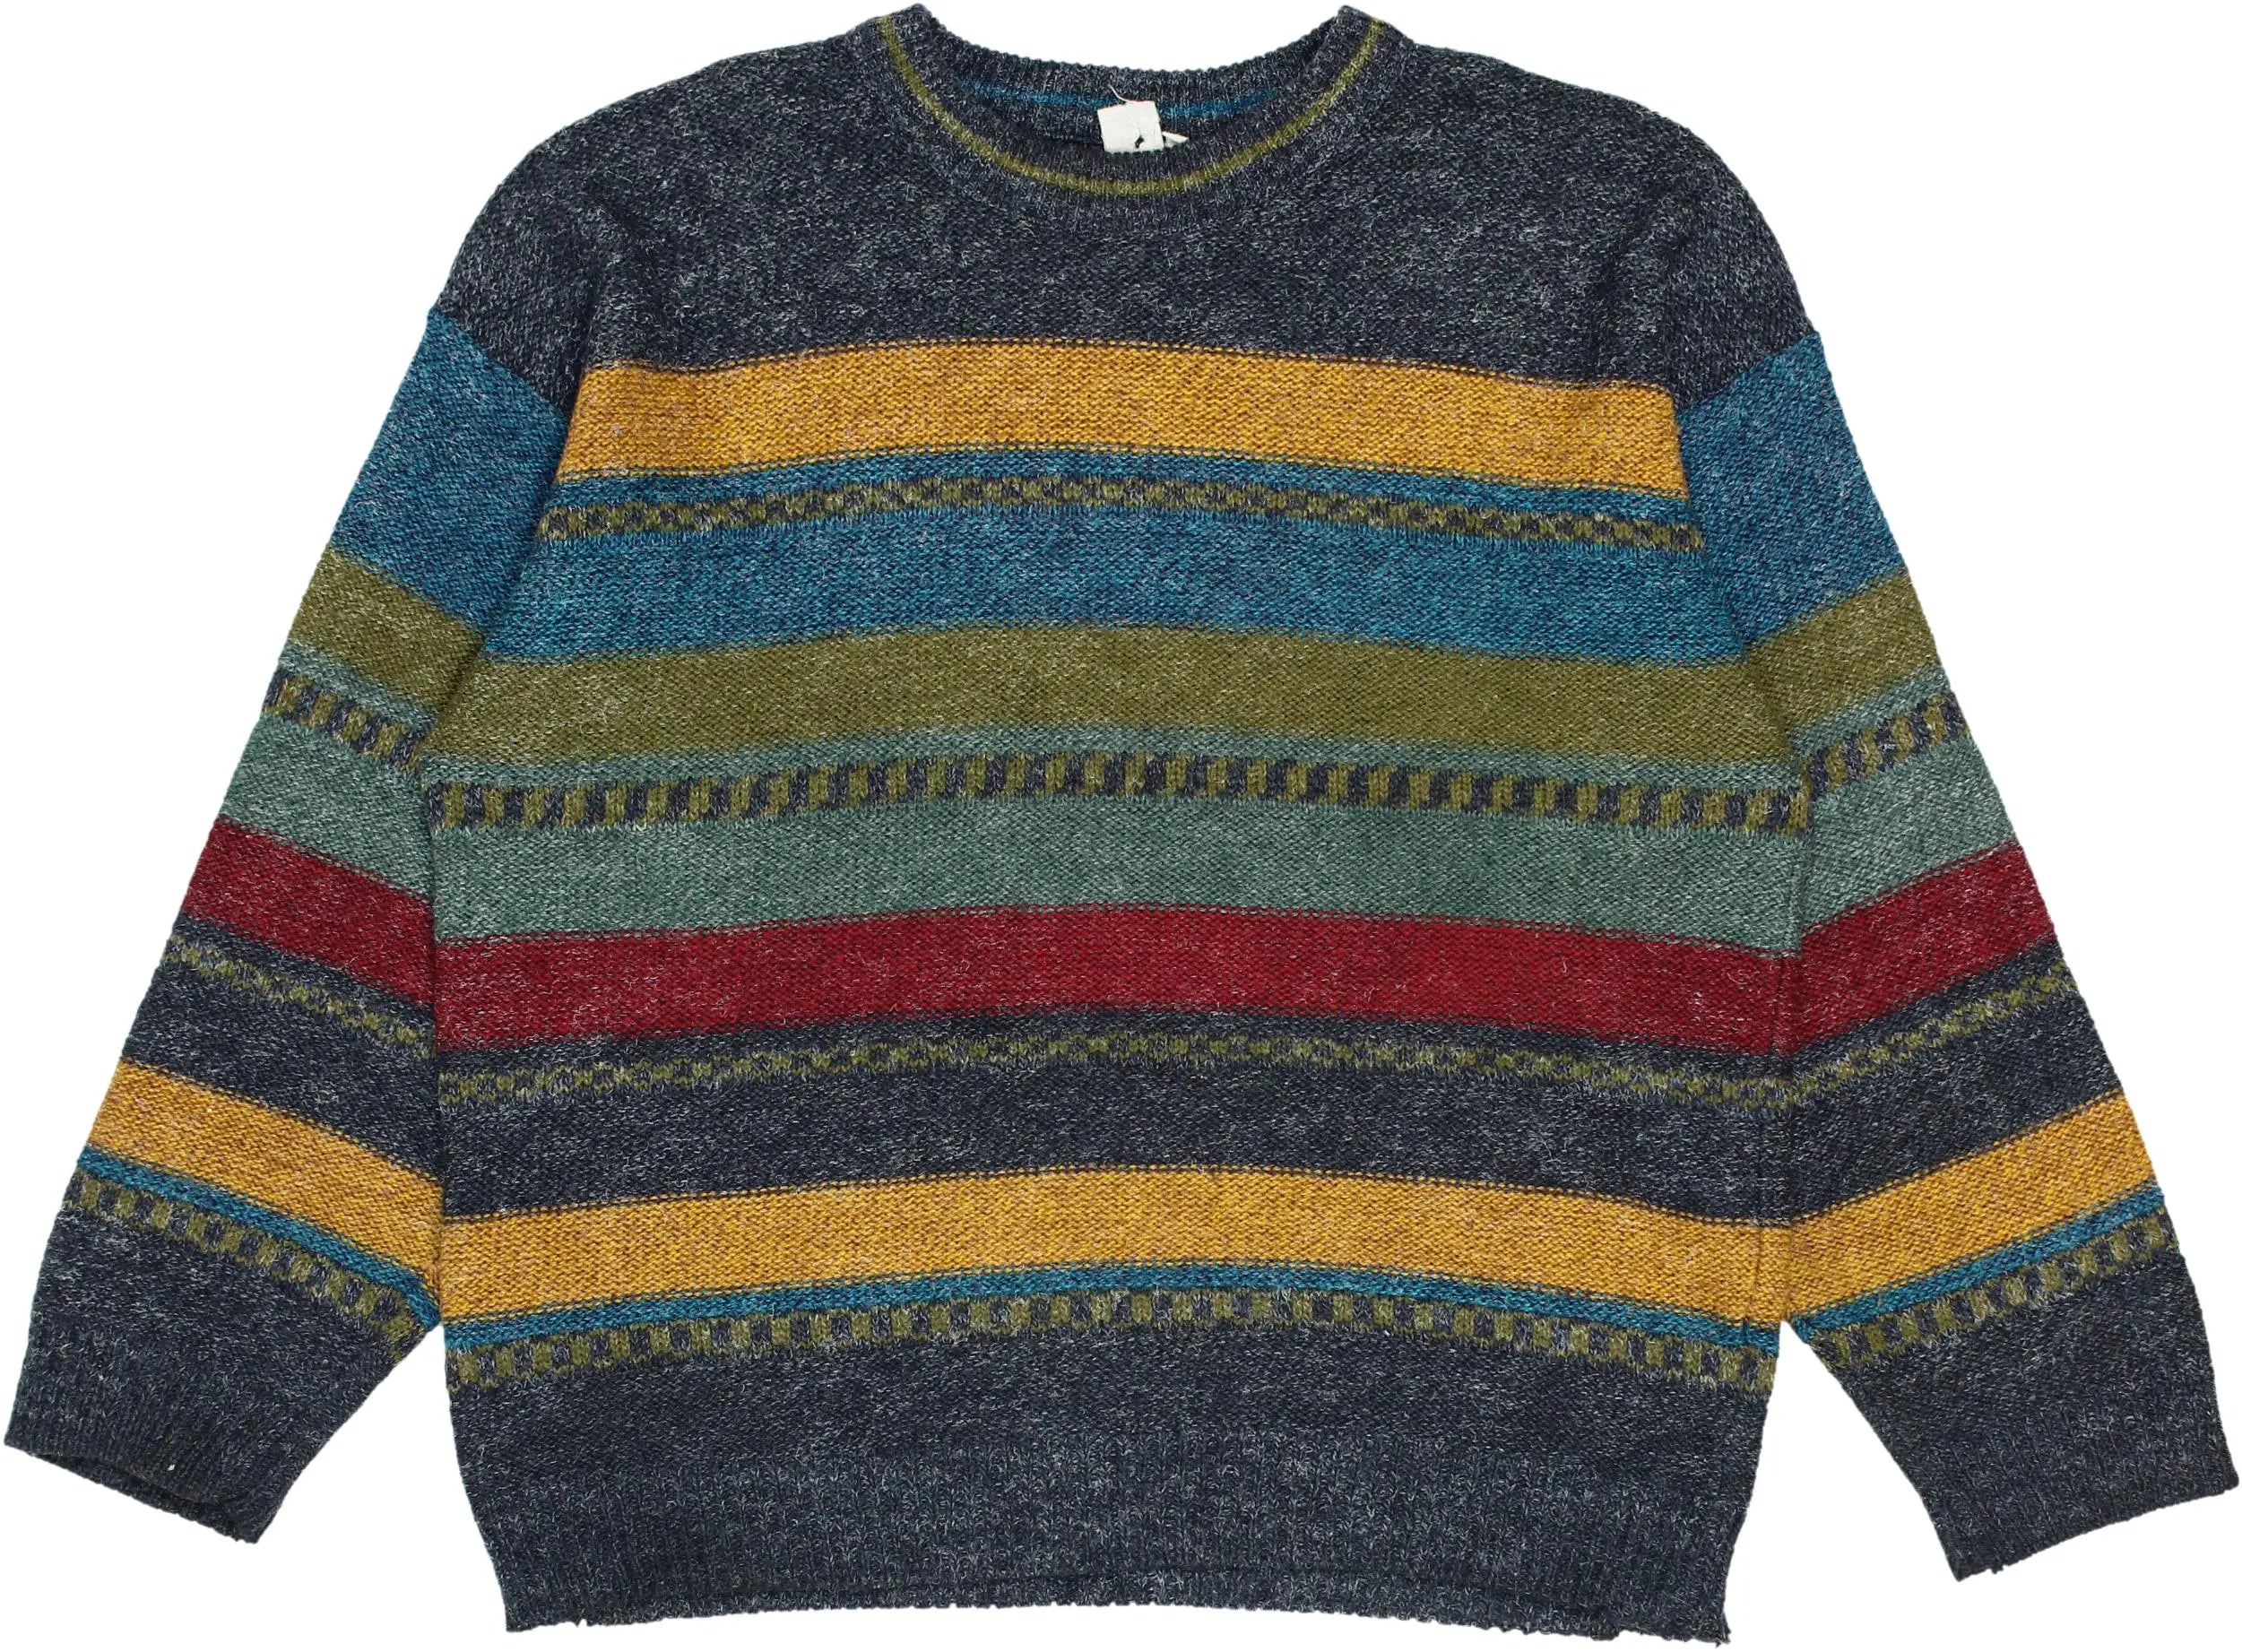 Unknown - Vintage Wool Blend Knitted Jumper- ThriftTale.com - Vintage and second handclothing